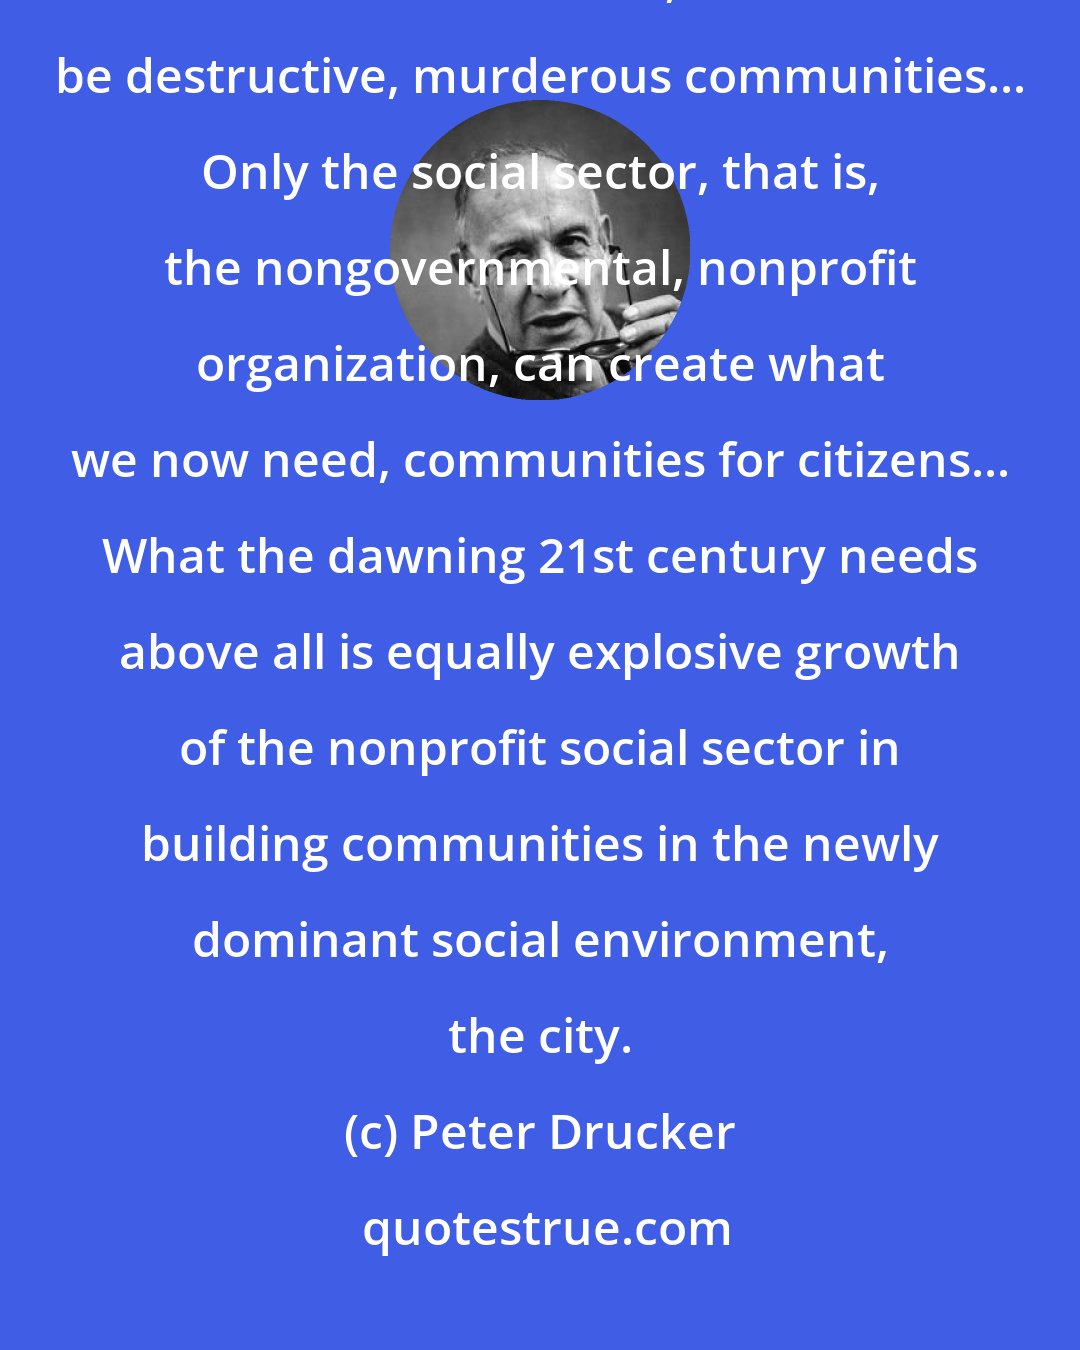 Peter Drucker: Human beings need community. If there are no communities available for constructive ends, there will be destructive, murderous communities... Only the social sector, that is, the nongovernmental, nonprofit organization, can create what we now need, communities for citizens... What the dawning 21st century needs above all is equally explosive growth of the nonprofit social sector in building communities in the newly dominant social environment, the city.